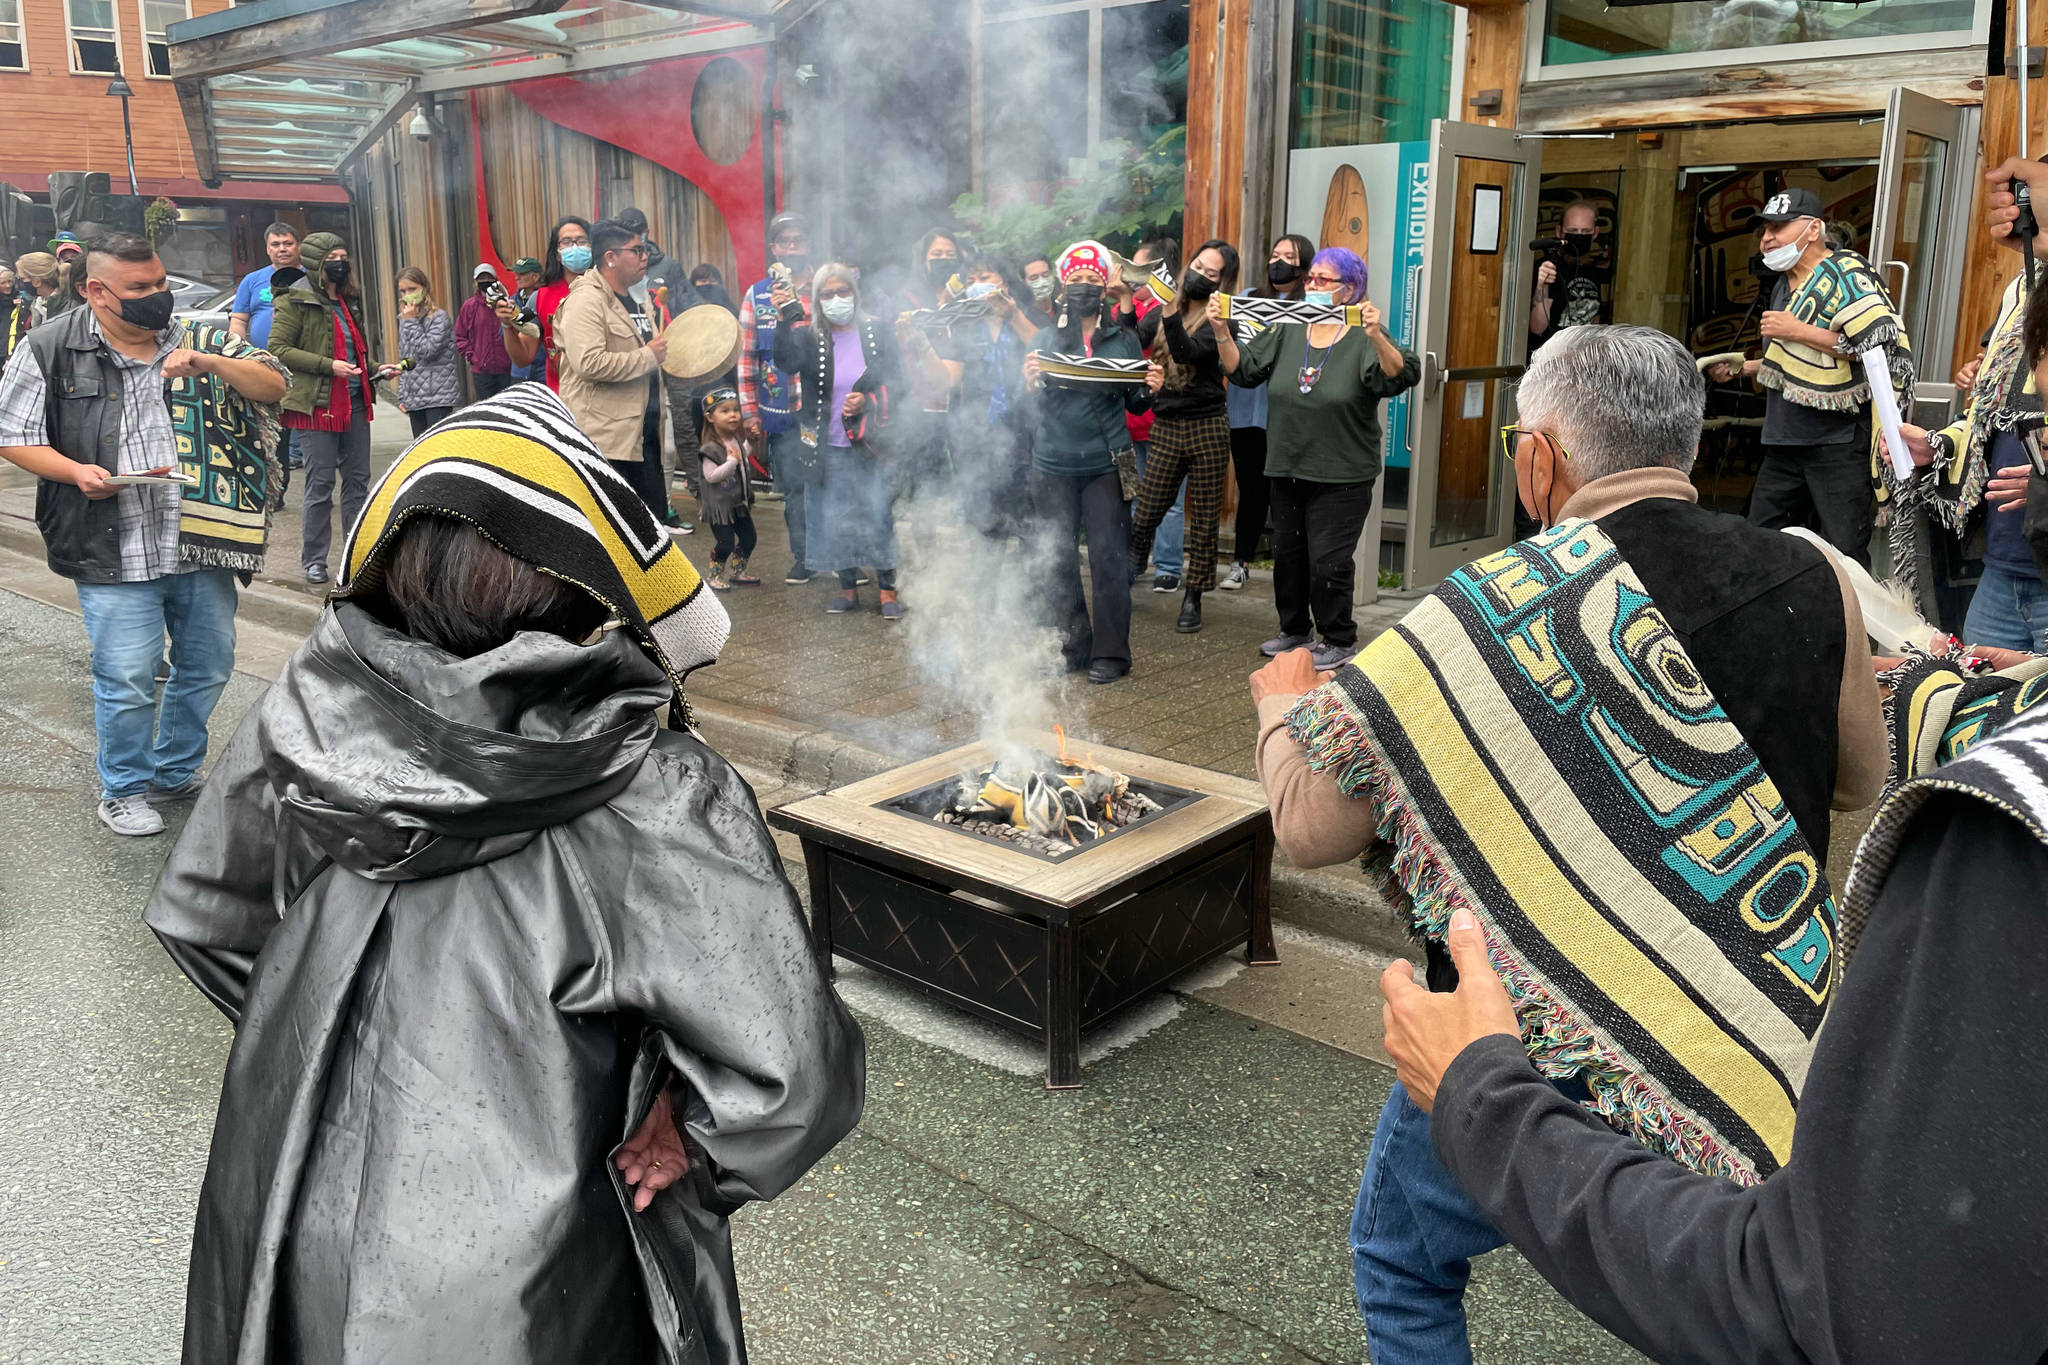 Michael S. Lockett / Juneau Empire
Participants burn an example of a commercial garment that led to a now-settled intellectual property lawsuit in a ceremony commemorating the settlement with the fashion company on Friday.